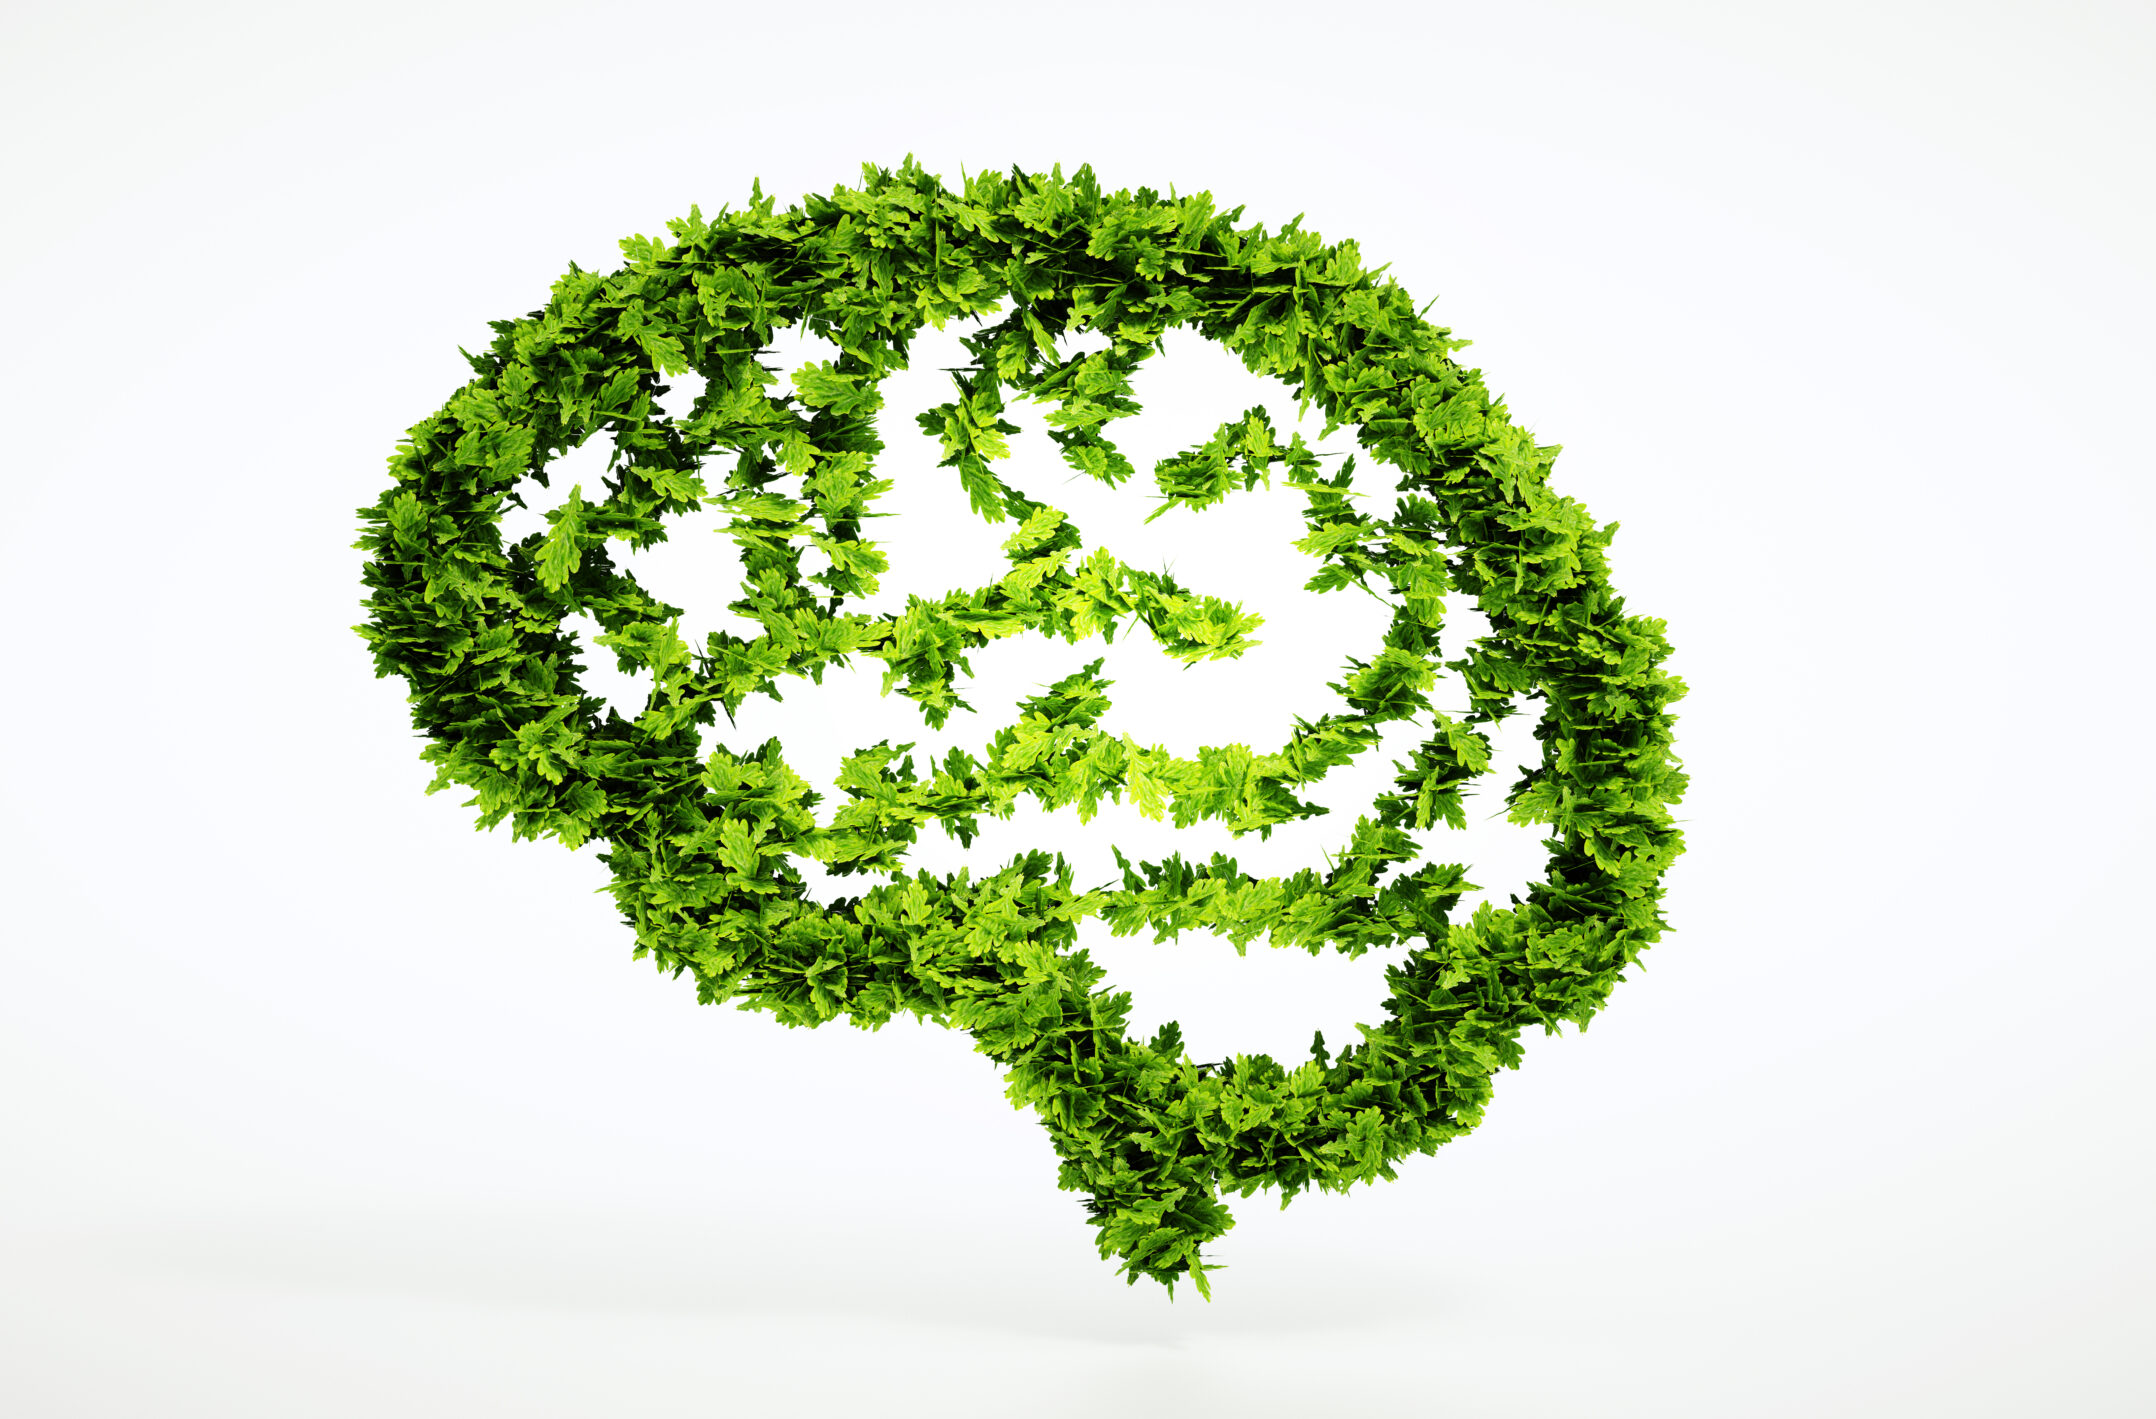 An illustration of a human brain using green plant leaves to lay out its design.